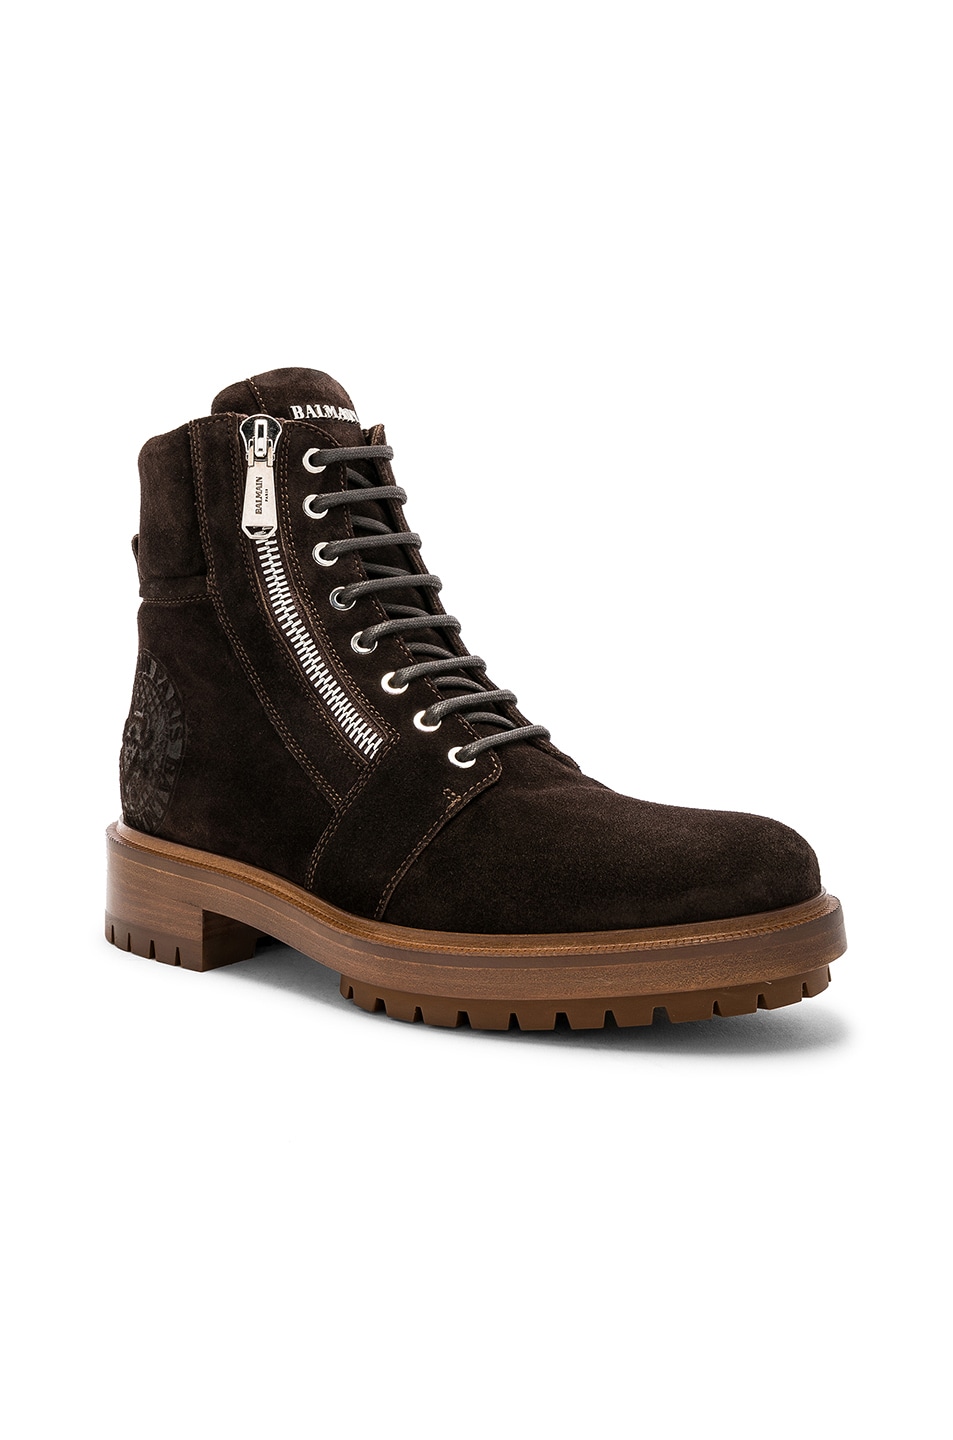 Image 1 of BALMAIN Suede Ranger Army Boots in Dark Brown